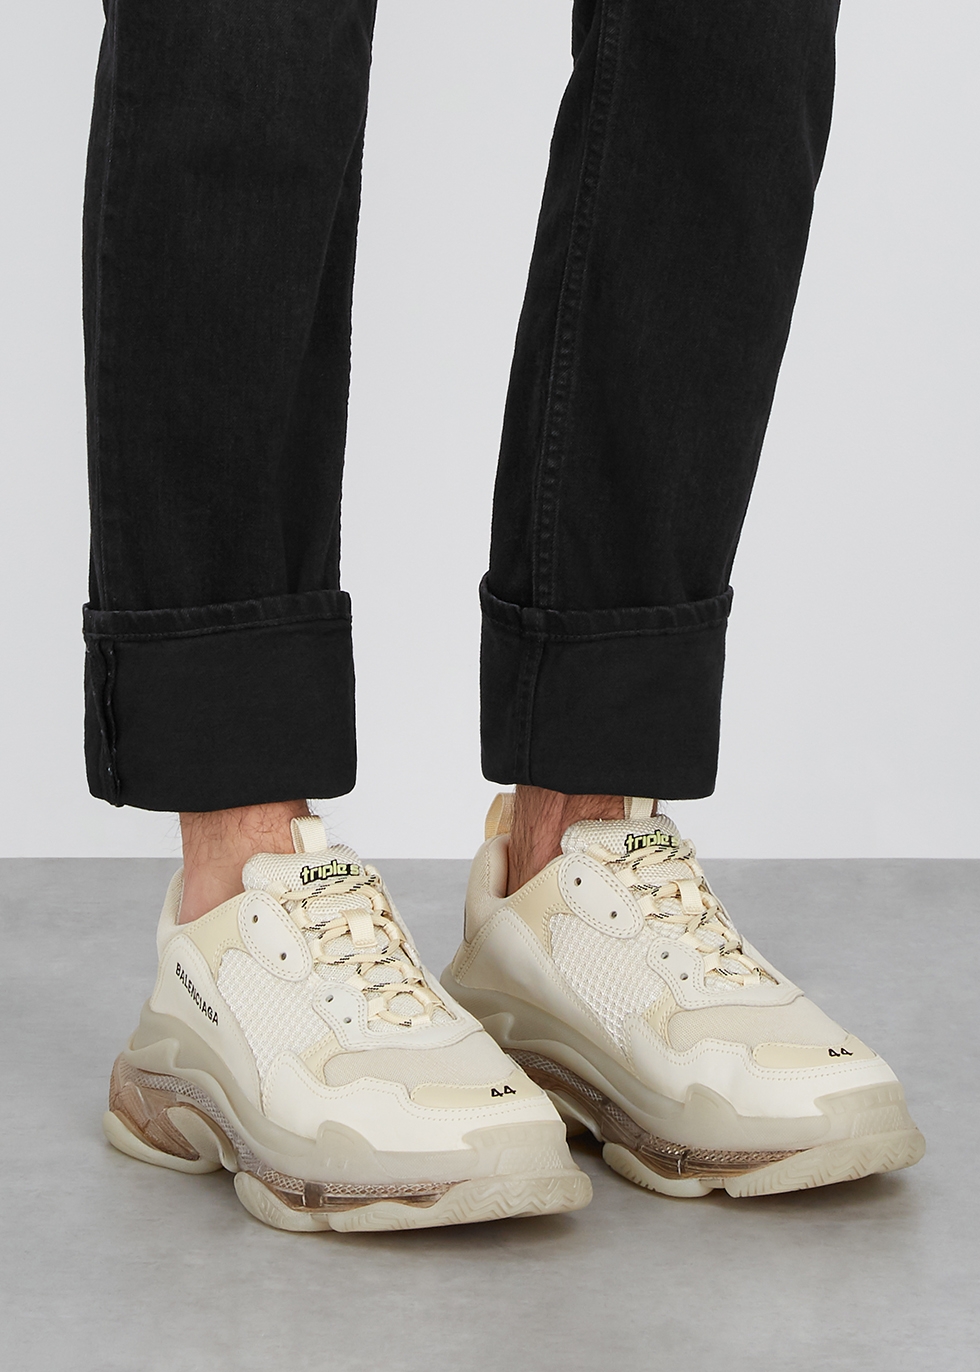 Balenciaga Triple S sneakersrefers pair style moment chunky